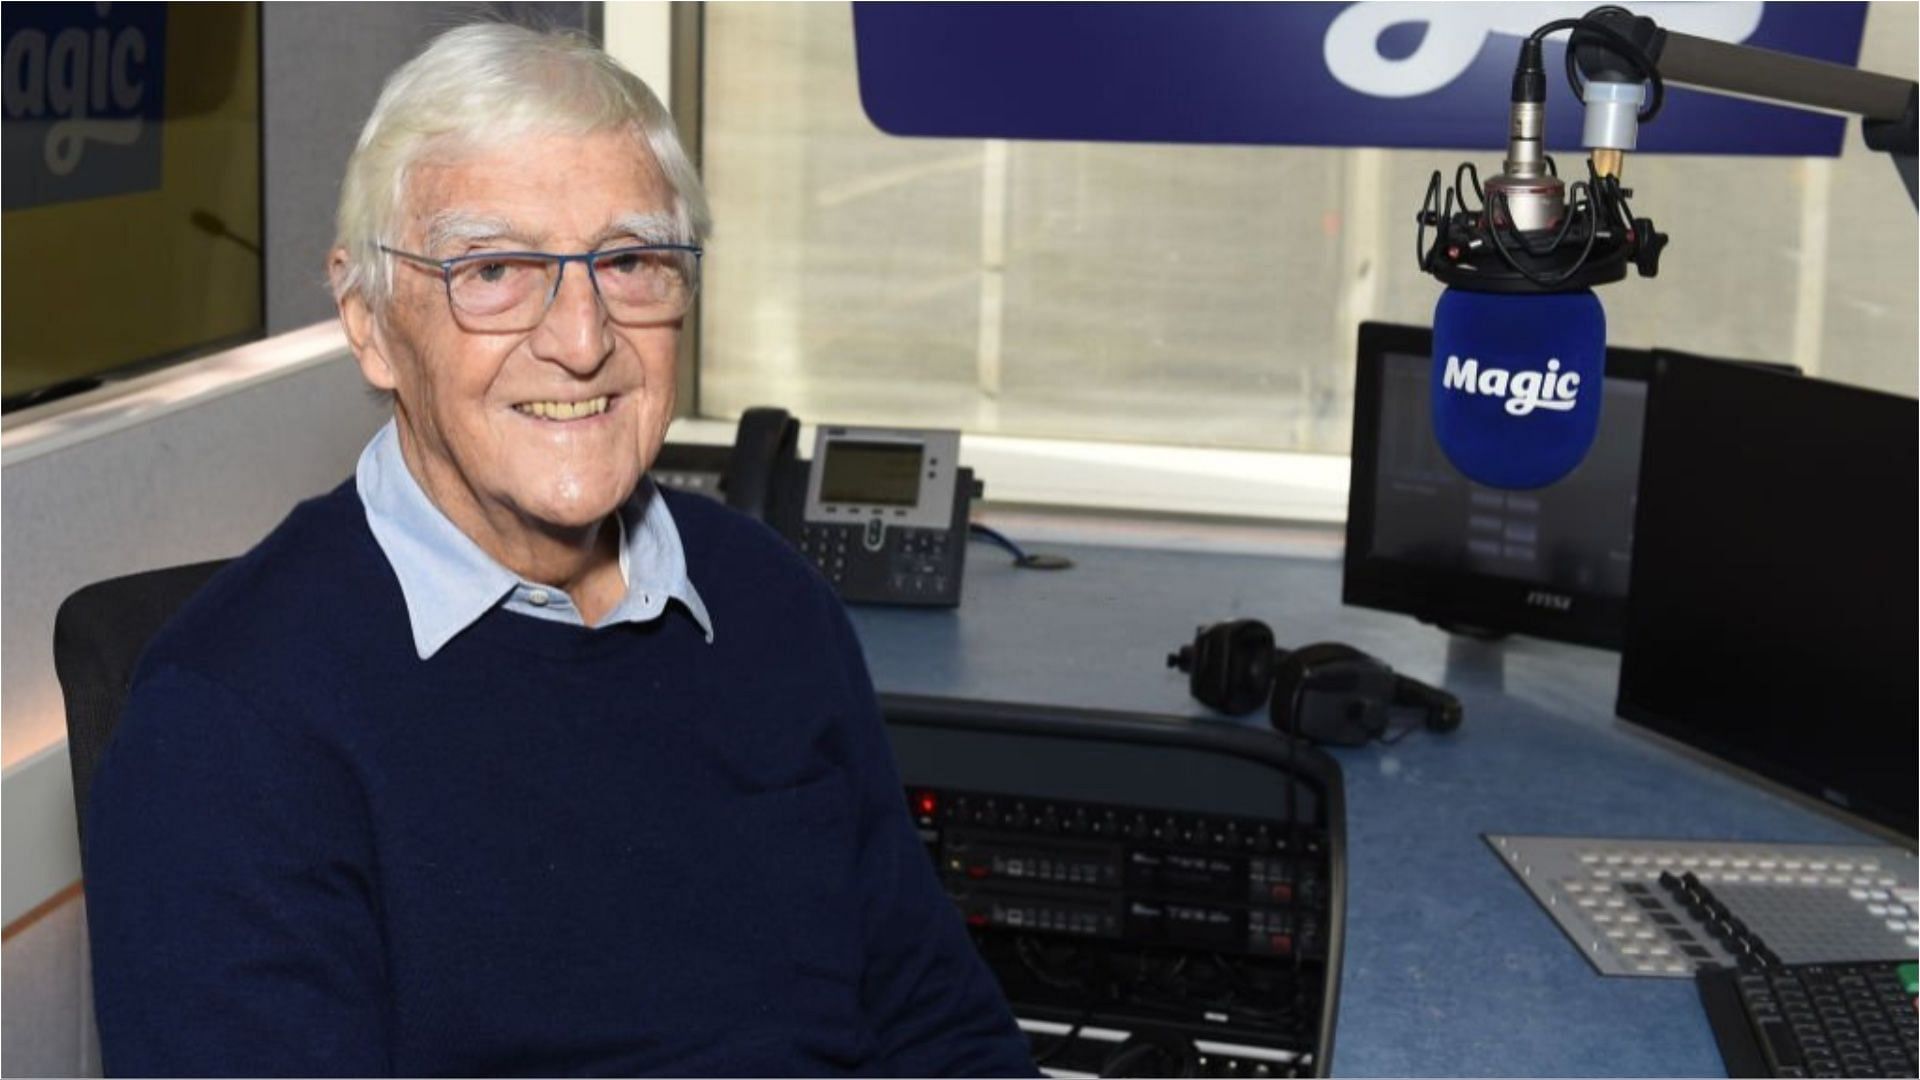 Sir Michael Parkinson recently died at the age of 88 (Image via Stuart C. Wilson/Getty Images)